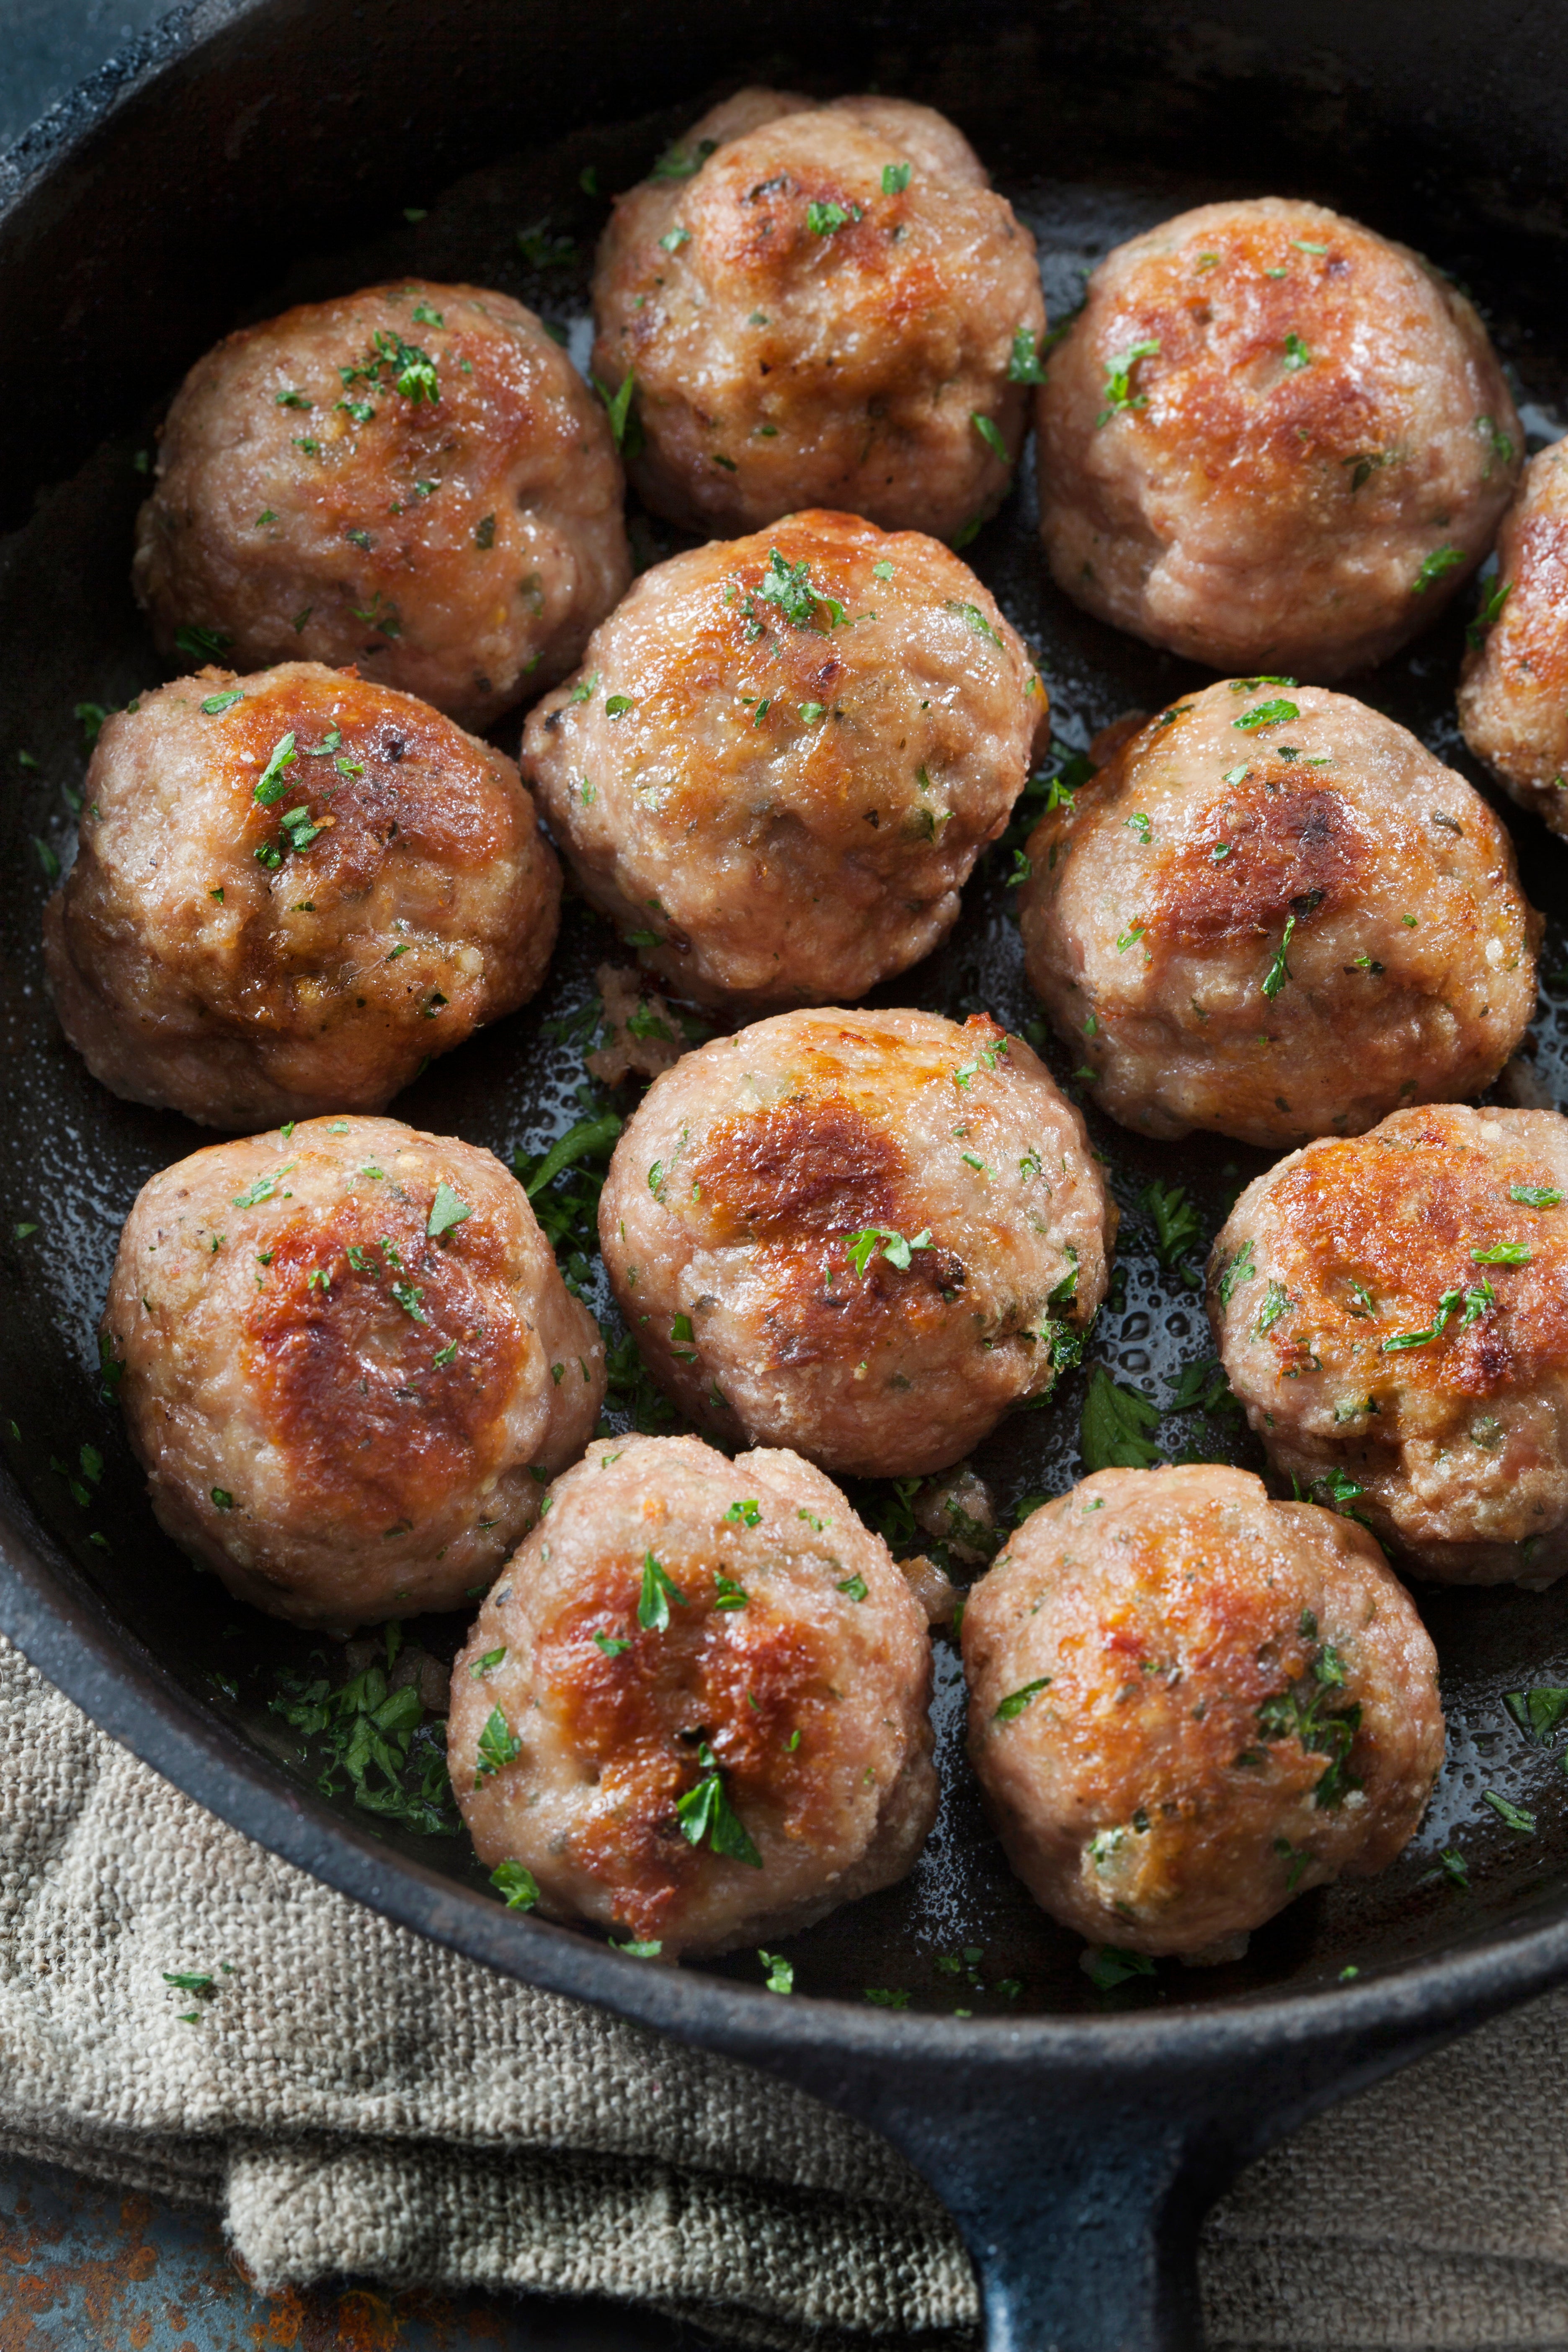 Meatballs are a thrifty way to eat meat